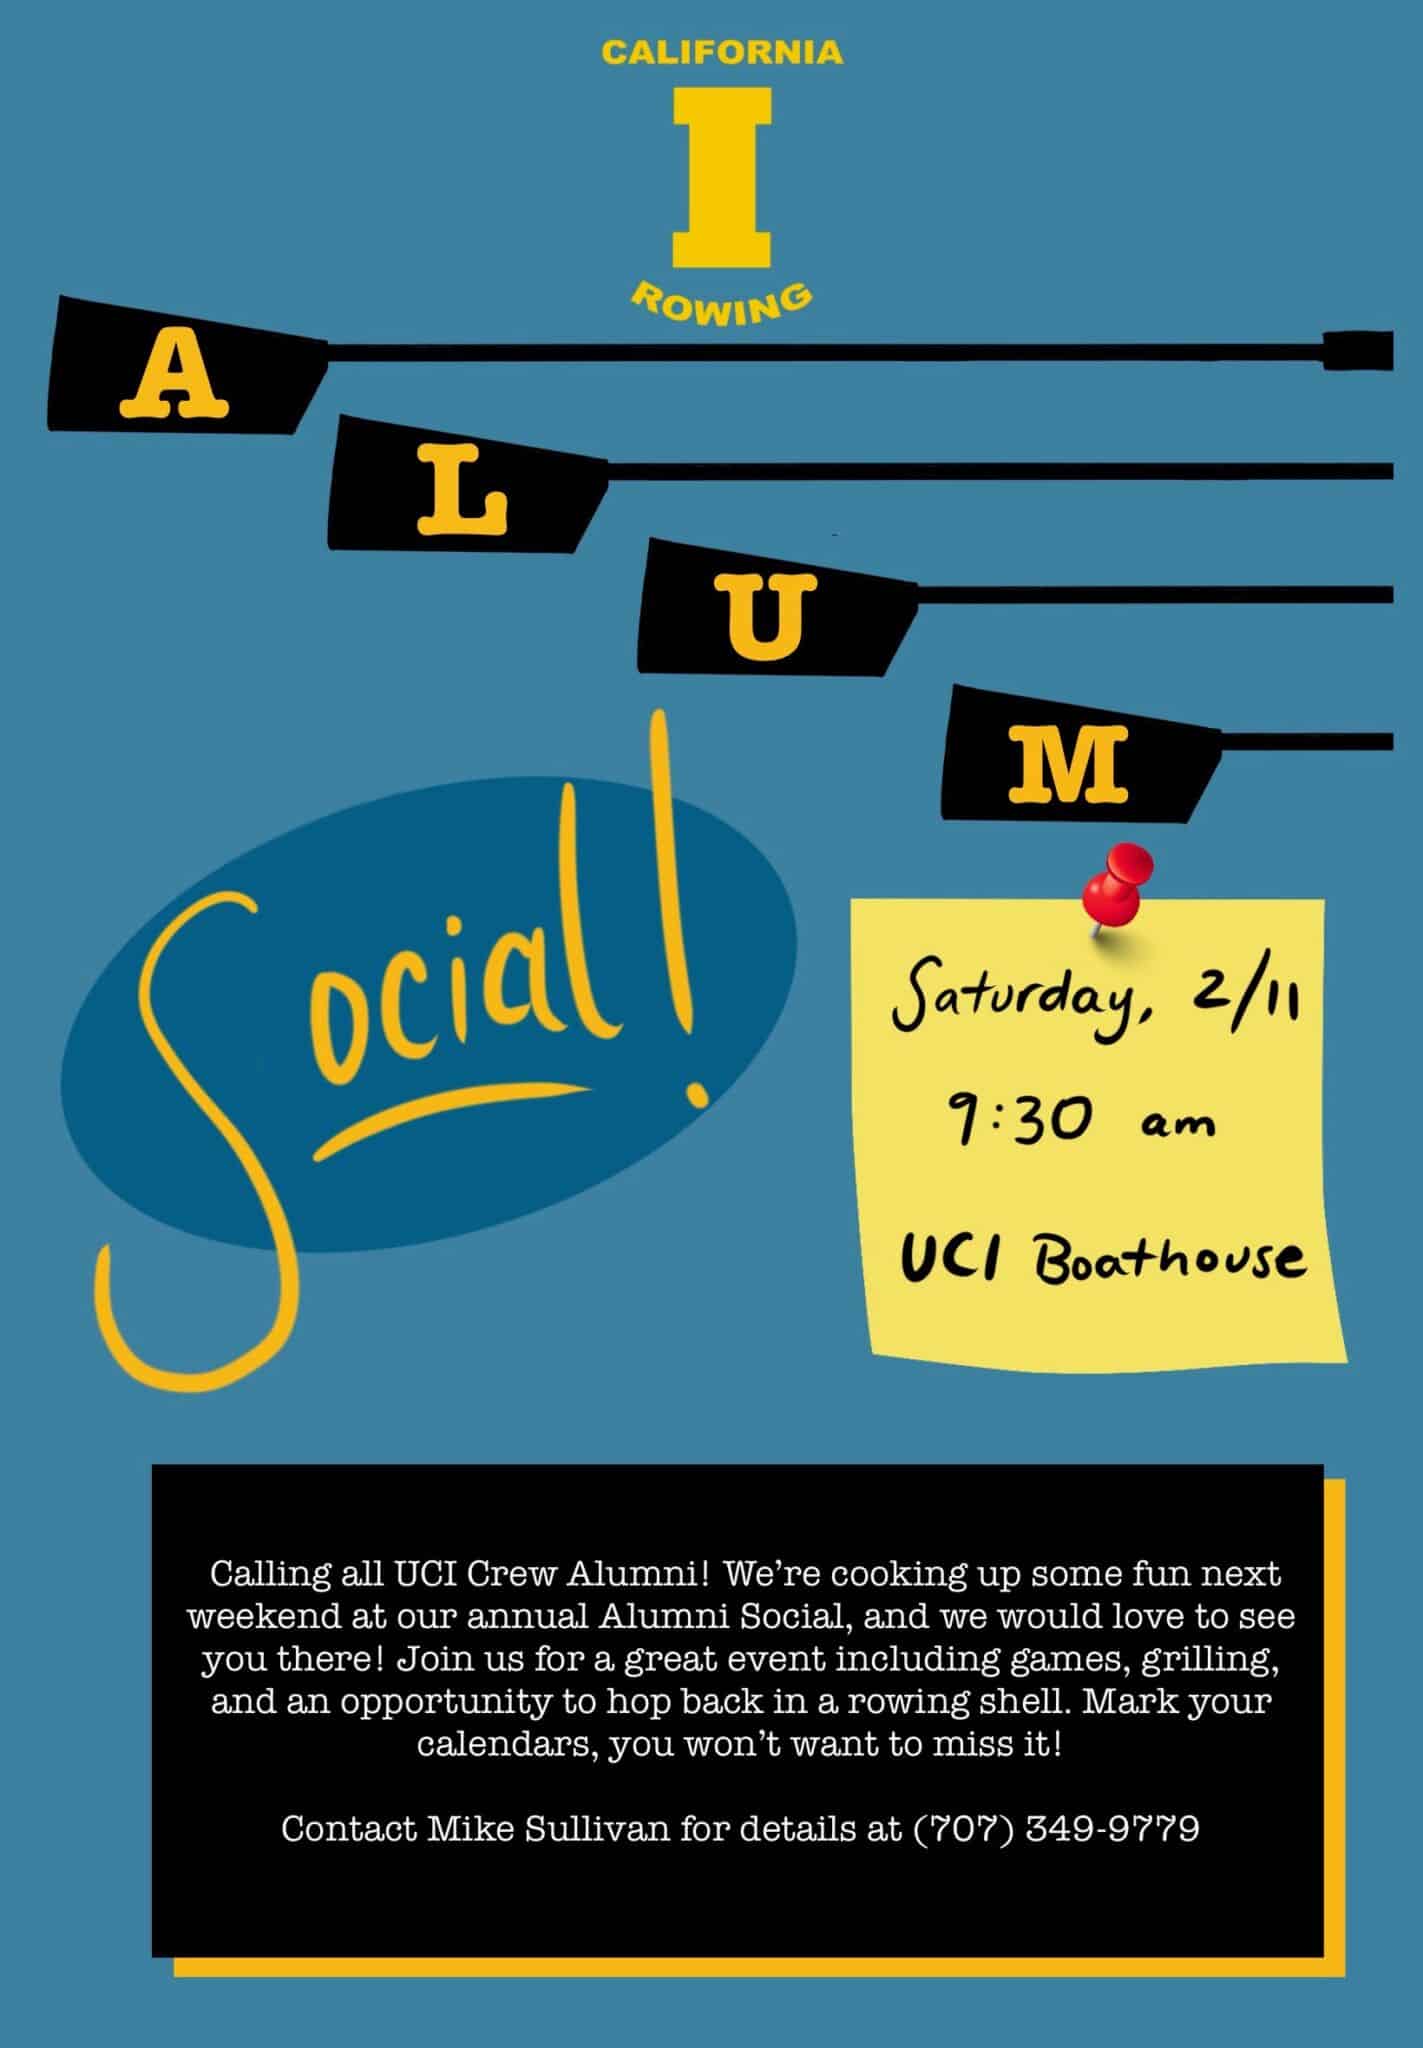 Alumni Social Flyer. Text reads: Saturday, 2/11 9:30 AM UCI Boathouse Calling all UCI Crew Alumni! We're cooking up some fun next weekend at our annual Alumni Social, and we would love to see you there! Join us for a great event including games, grilling, and an opportunity to hop back in a rowing shell. Mark your calendars, you won't want to miss it! Contact Mike Sullivan for details at (707) 349-9779